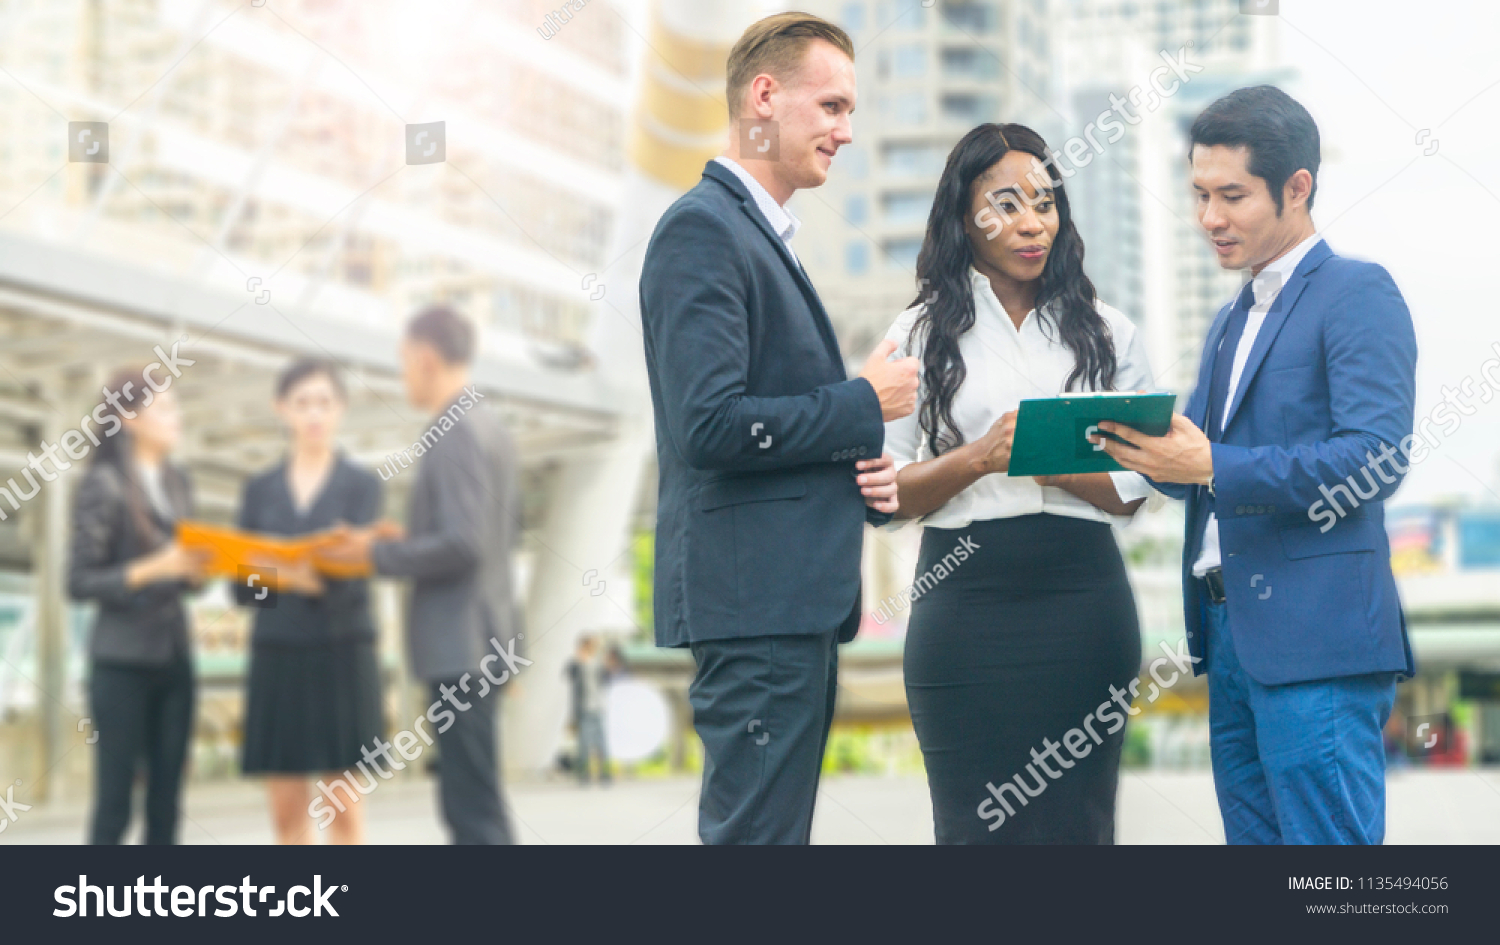 group of people business workers in suit cloth meet and talk at the outdoor city space #1135494056